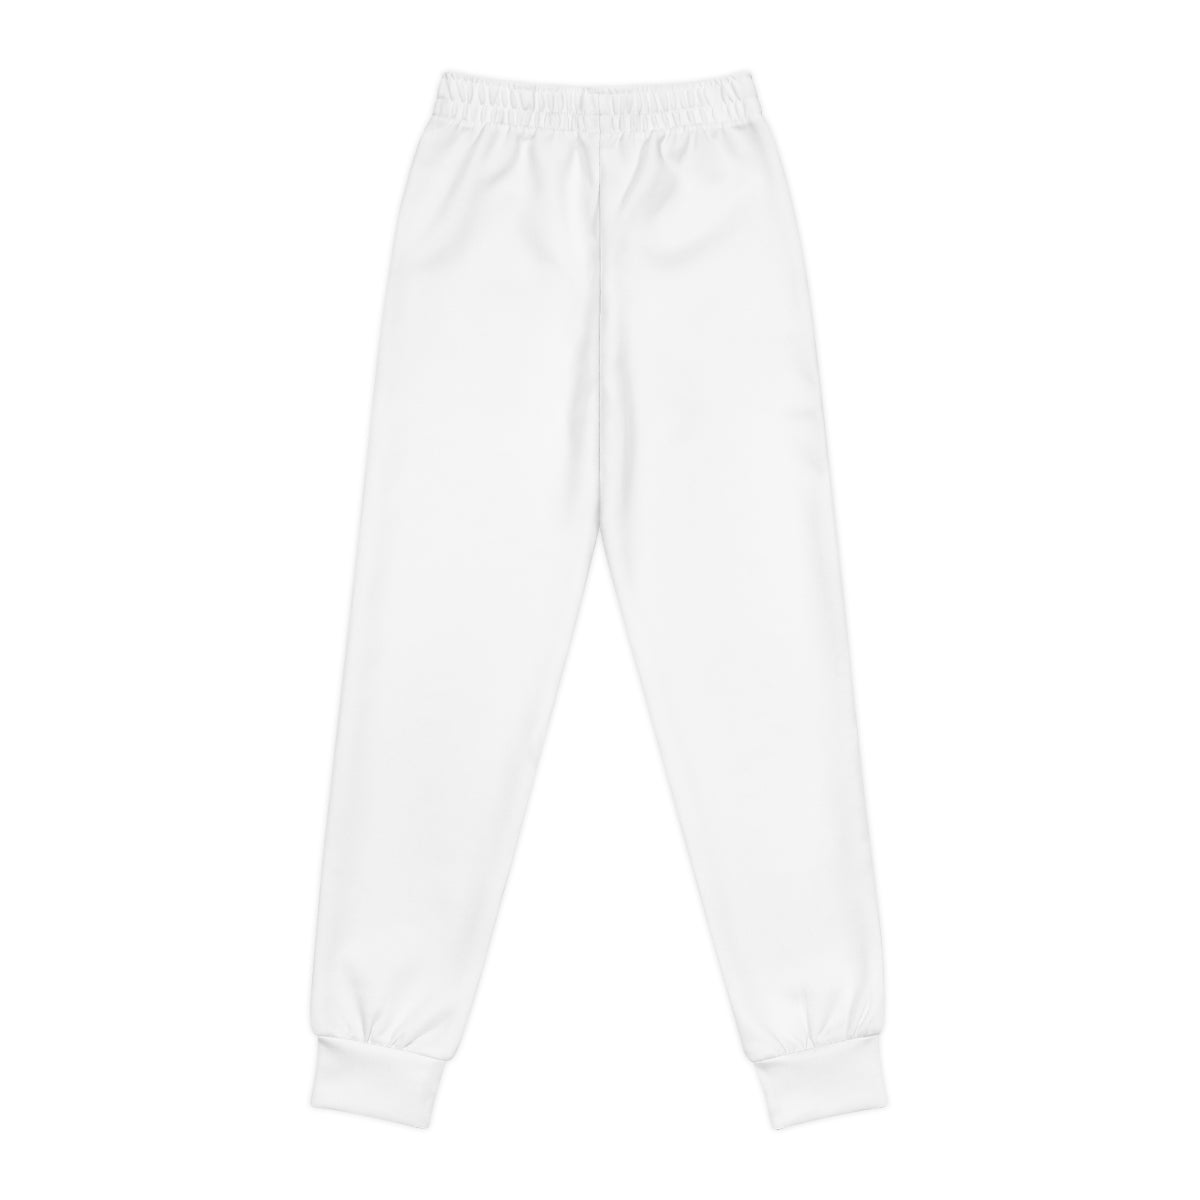 Yoga Youth Joggers - Personal Hour Style White Yoga Pants - Personal Hour for Yoga and Meditations 